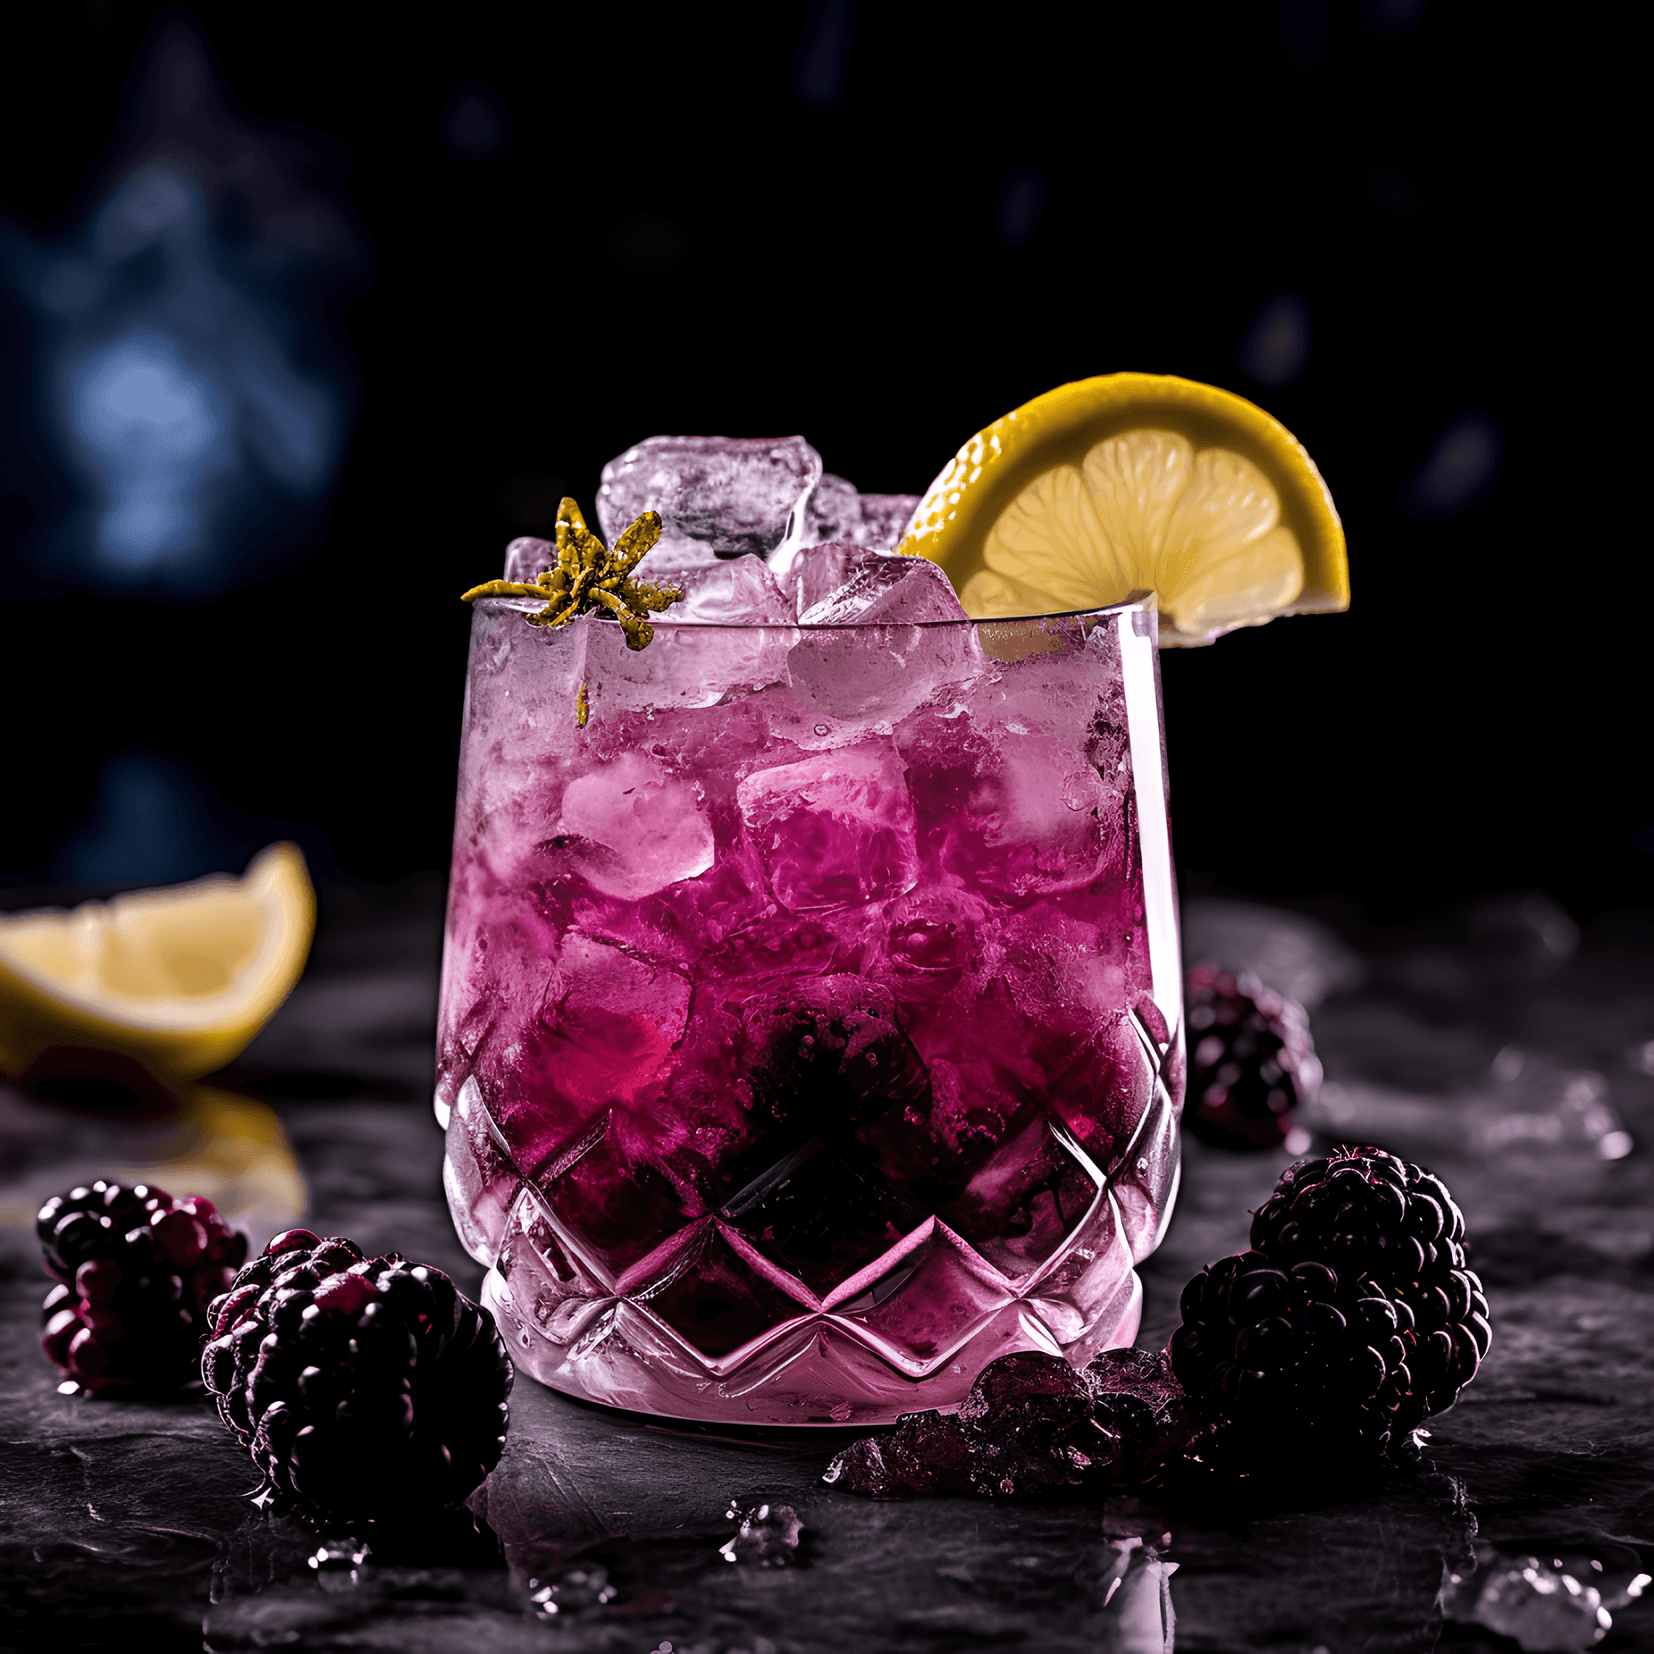 Blackberry Bramble Cocktail Recipe - The Blackberry Bramble is a sweet, fruity, and refreshing cocktail with a tangy kick from the lemon juice. It has a well-balanced flavor profile, making it a perfect choice for those who enjoy both sweet and sour notes in their cocktails.